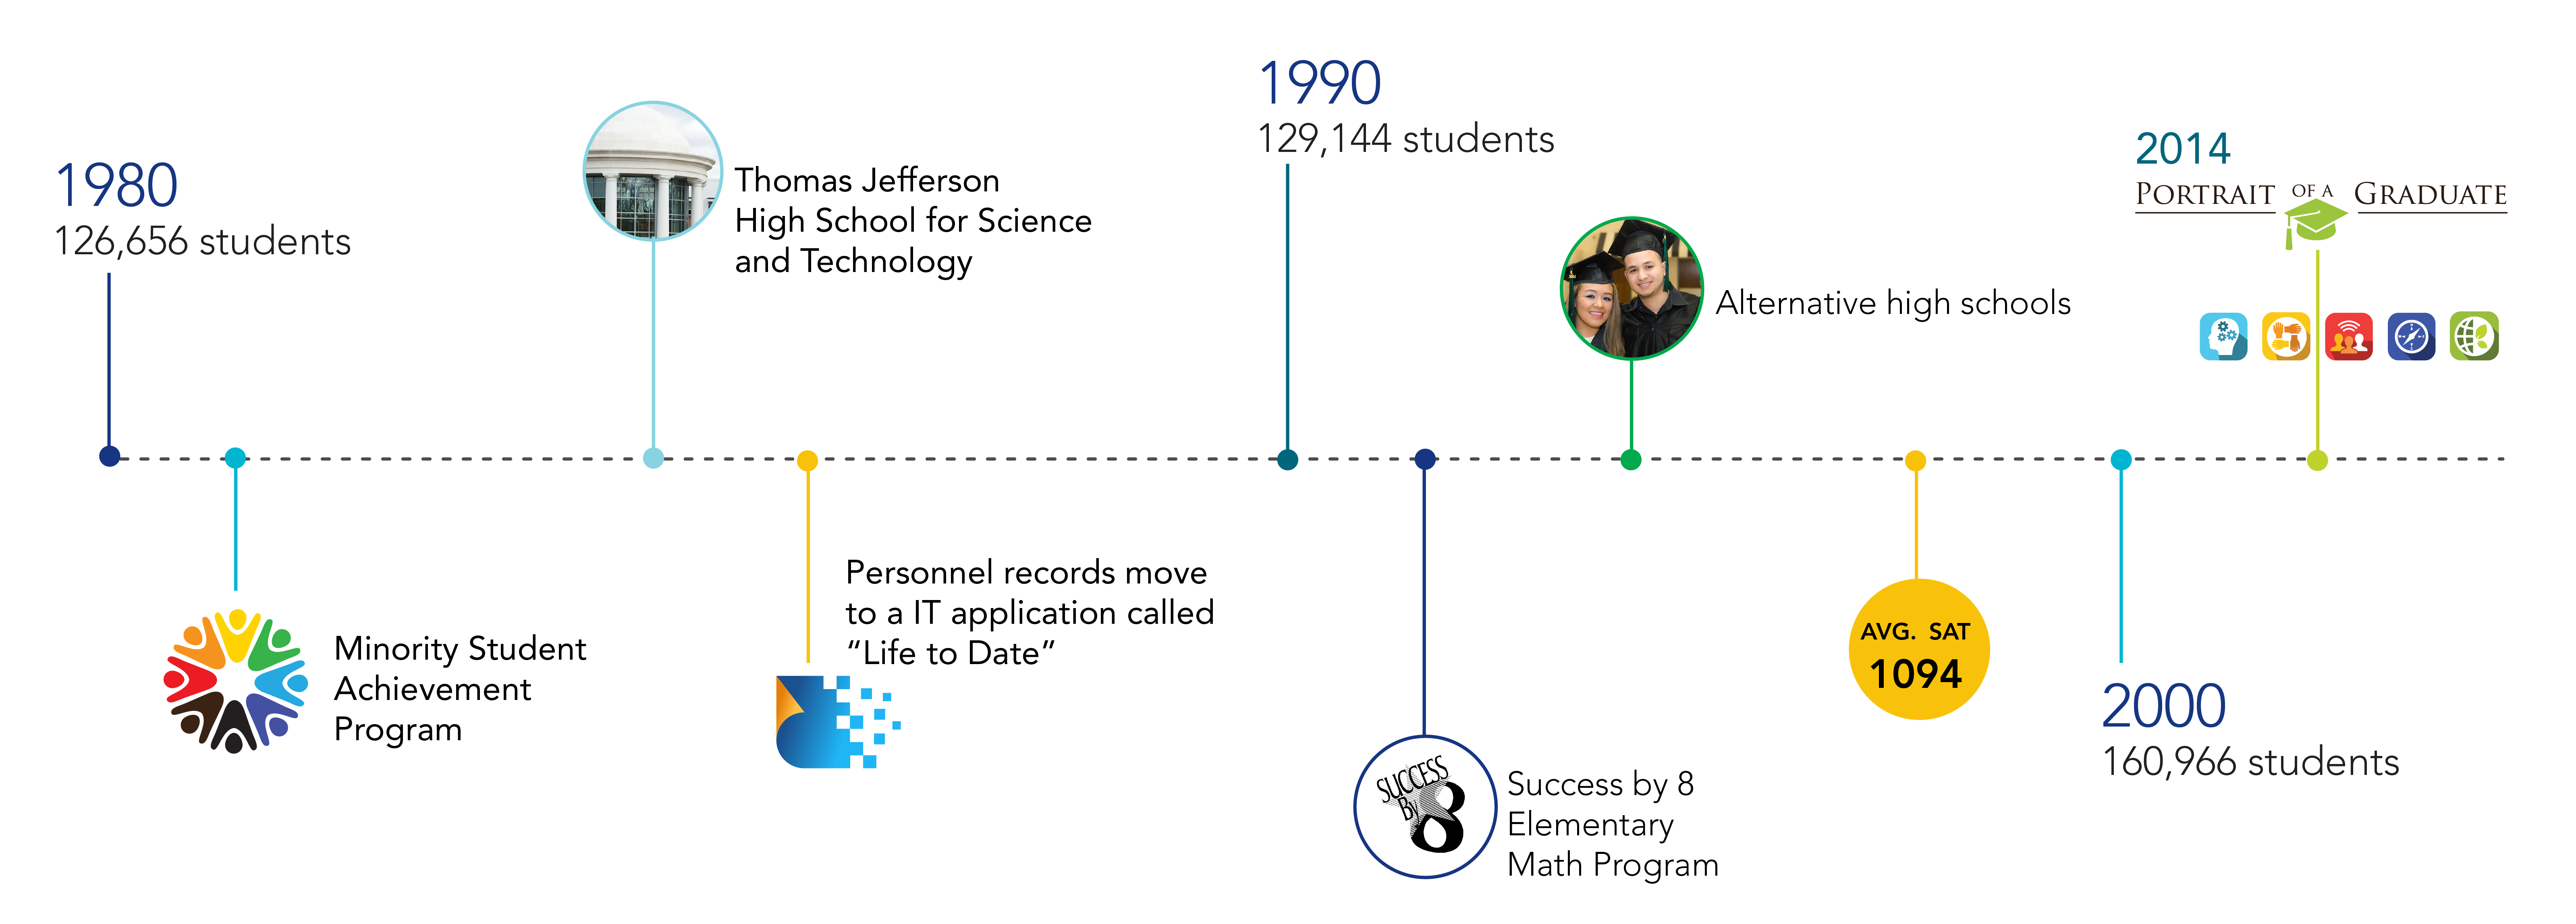 History timeline of FCPS, 1980 to 2014